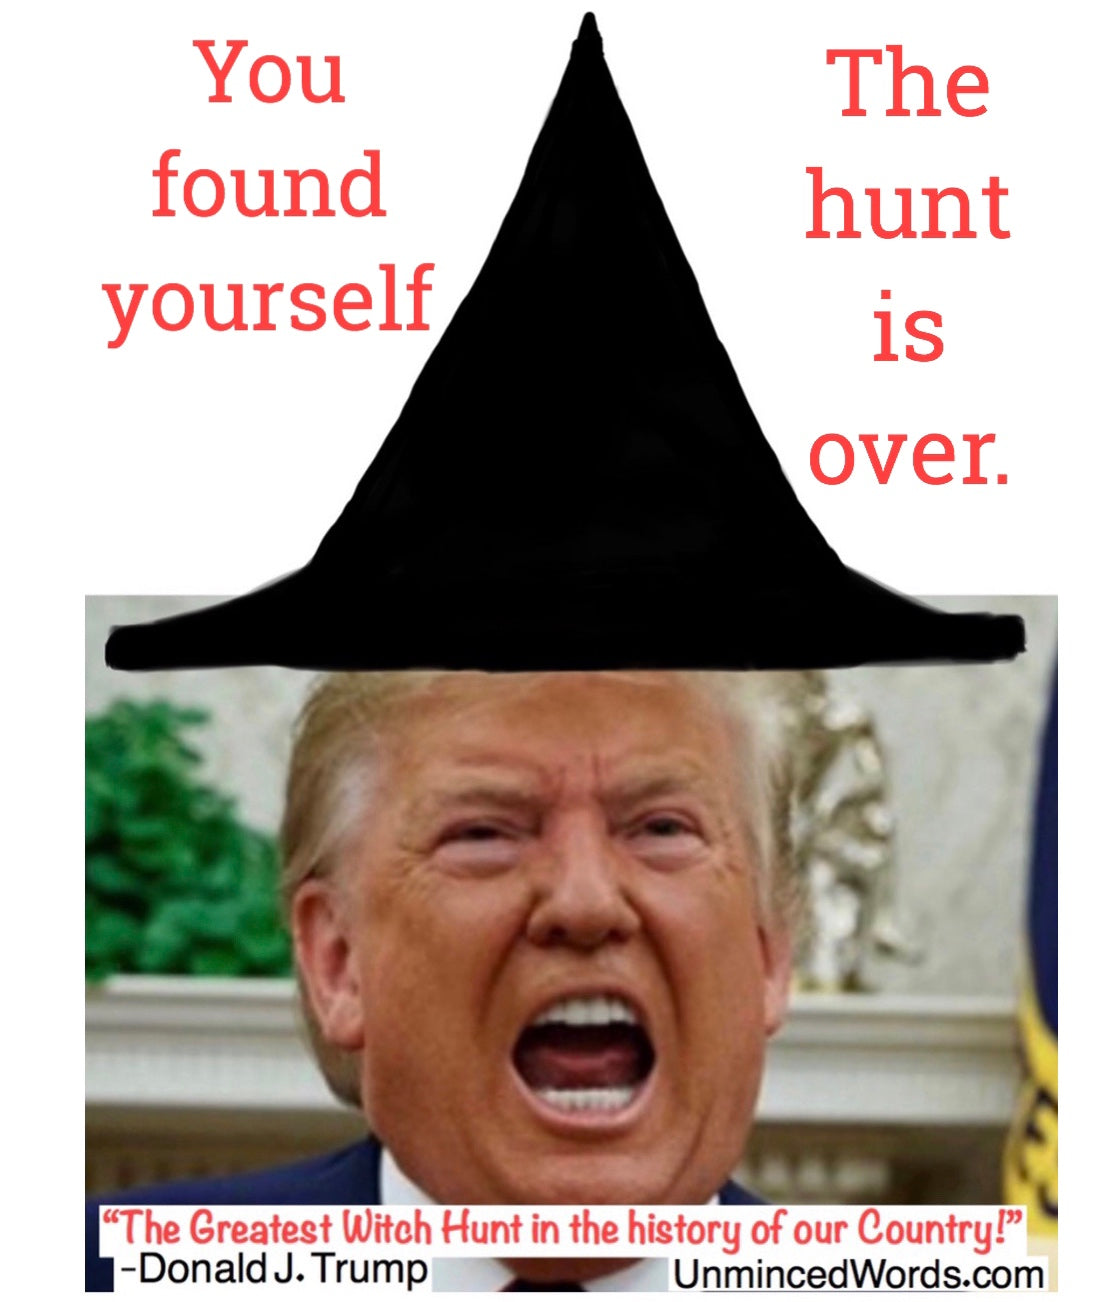 The Witch Hunt Is Over!